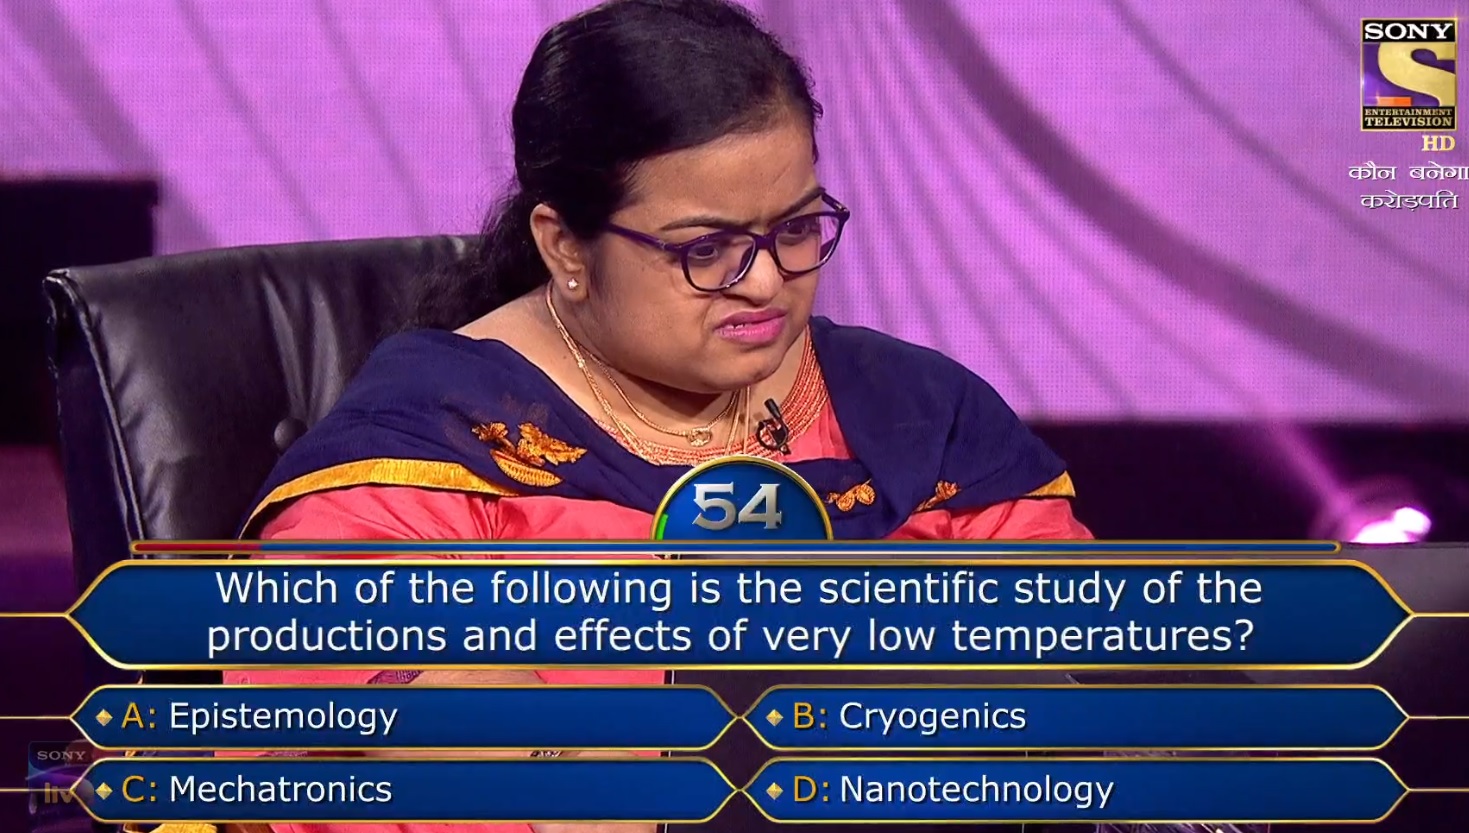 Ques : Which of the following is the scientific study of the productions and effects of very low temperatures?